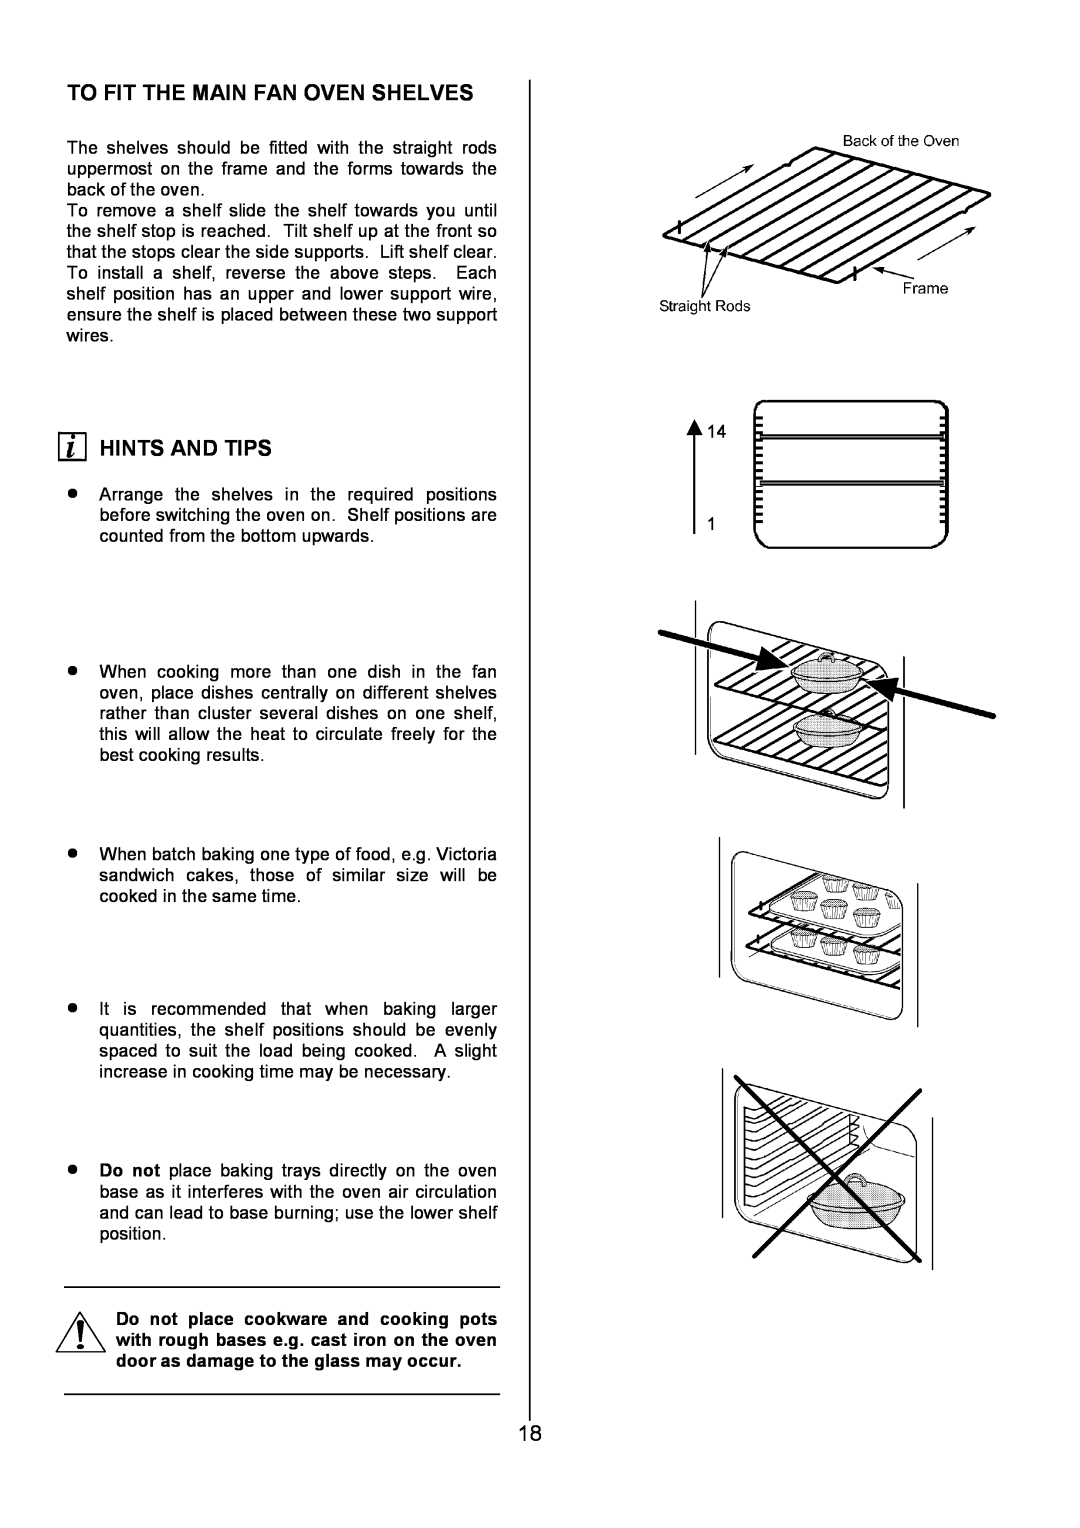 AEG U3100-4 manual To Fit The Main Fan Oven Shelves, Hints And Tips 